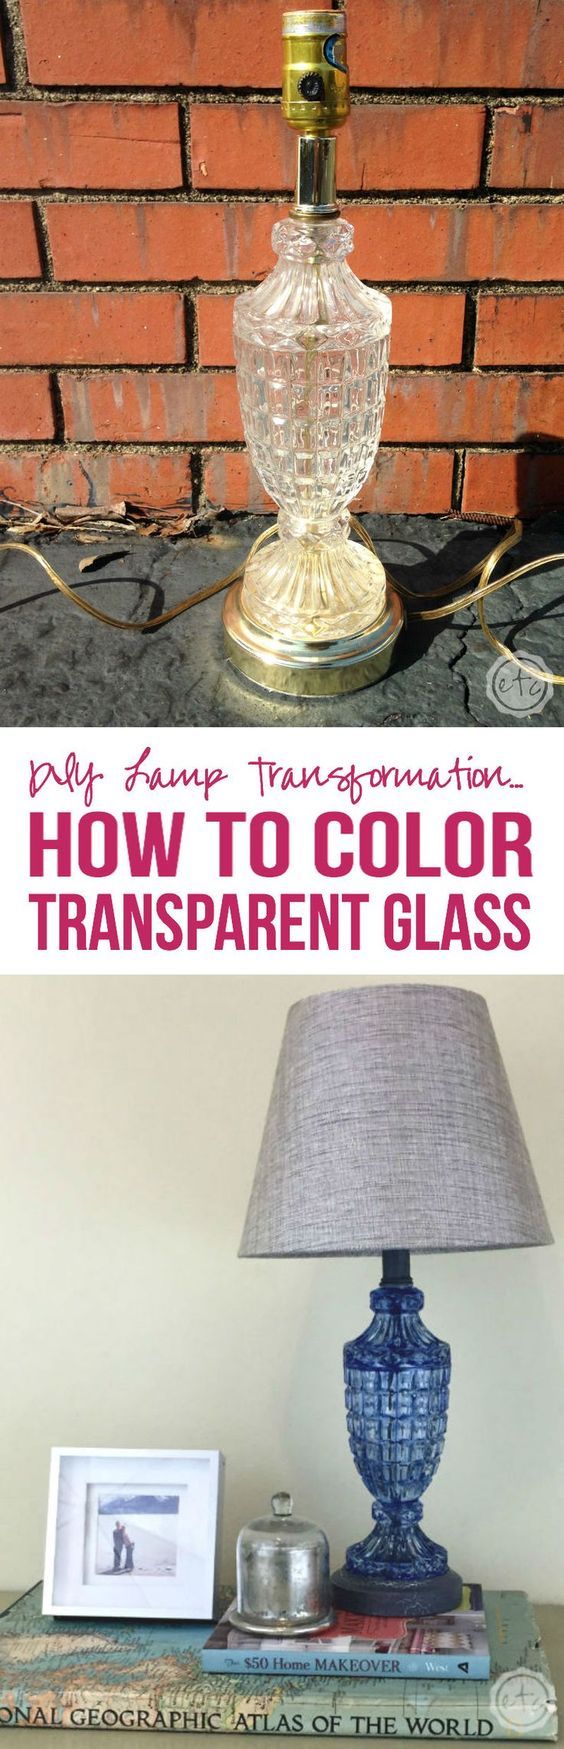 DIY Lamp Transformation... How to Color Transparent Glass